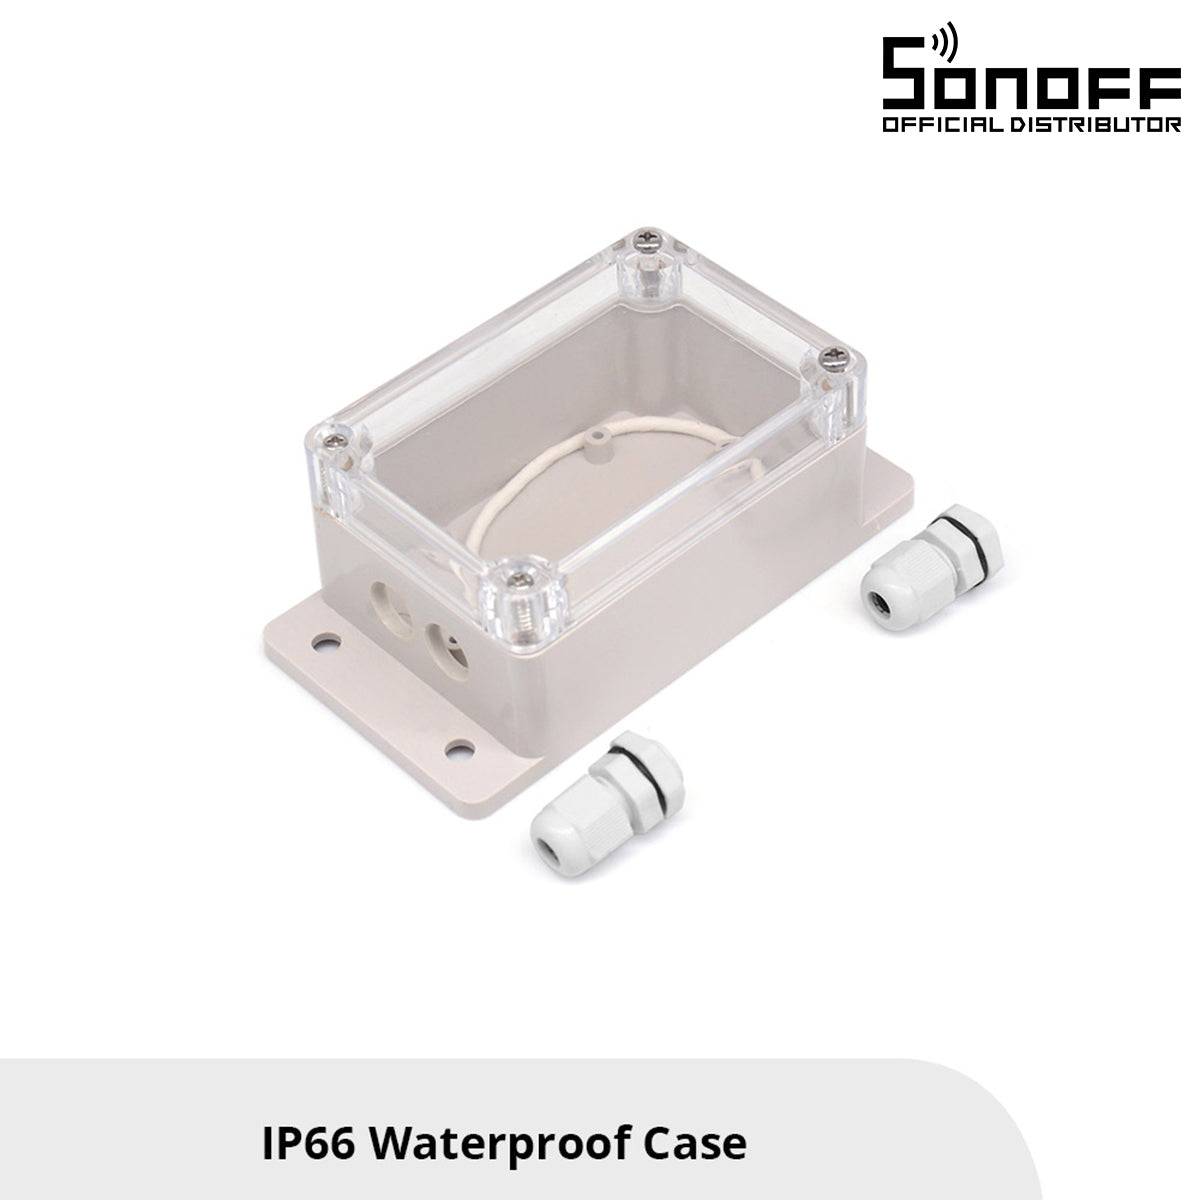 GloboStar® 80041 SONOFF IP66-CASE-R2 - BOX Case for SONOFF Smart Switches Waterproof IP66 - ledmania.gr